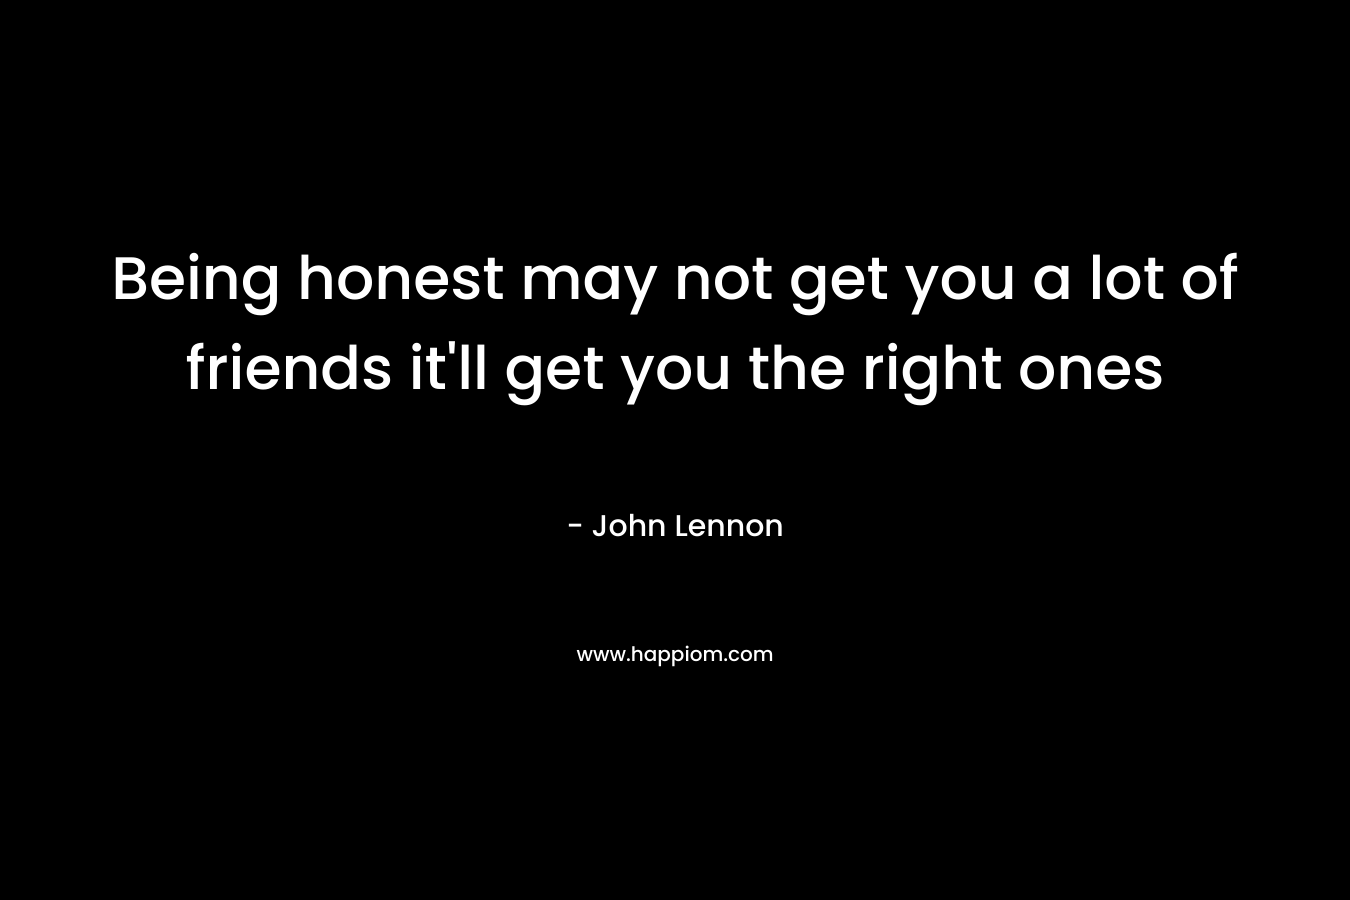 Being honest may not get you a lot of friends it'll get you the right ones